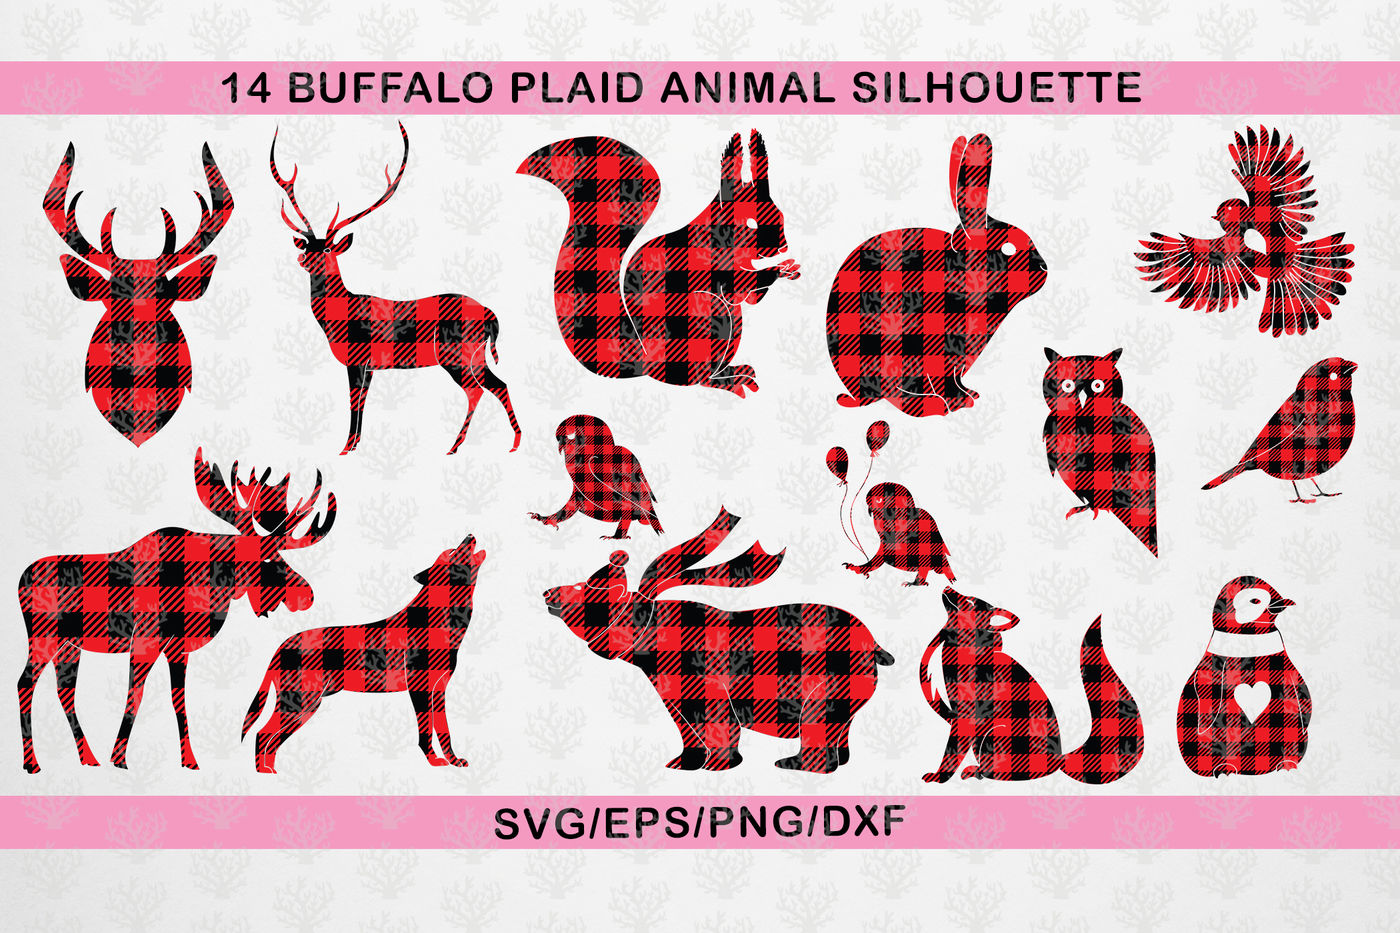 SVG file Full Color Plaid Moose Fashion Red and Black Fall Autumn Animal Kids Clipart for Cricut Silhouette Vinyl Cut machine